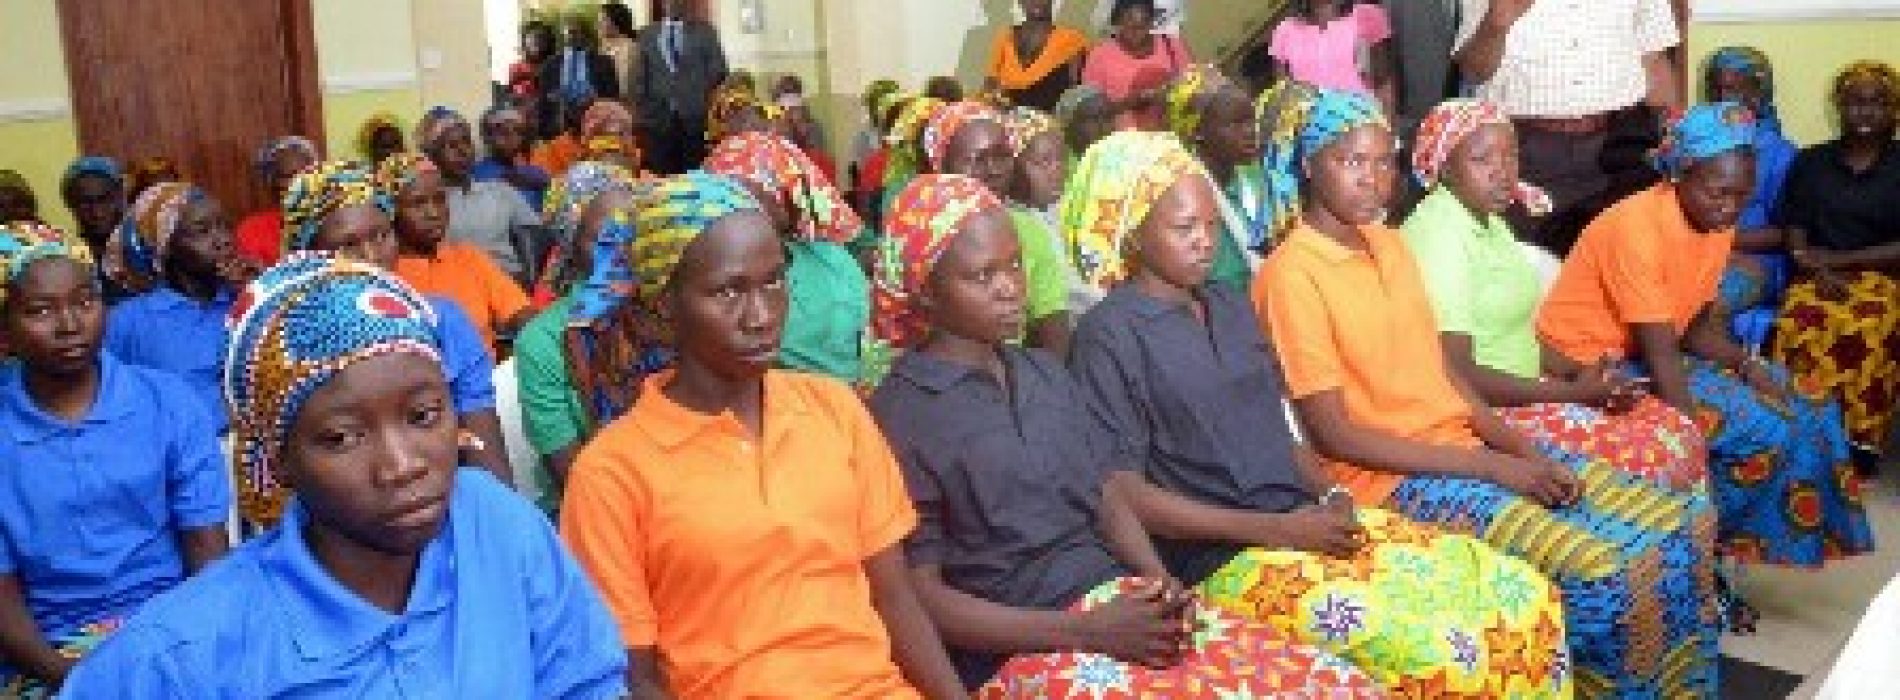 UNFPA donates ‘dignity kits’ to released Chibok girls